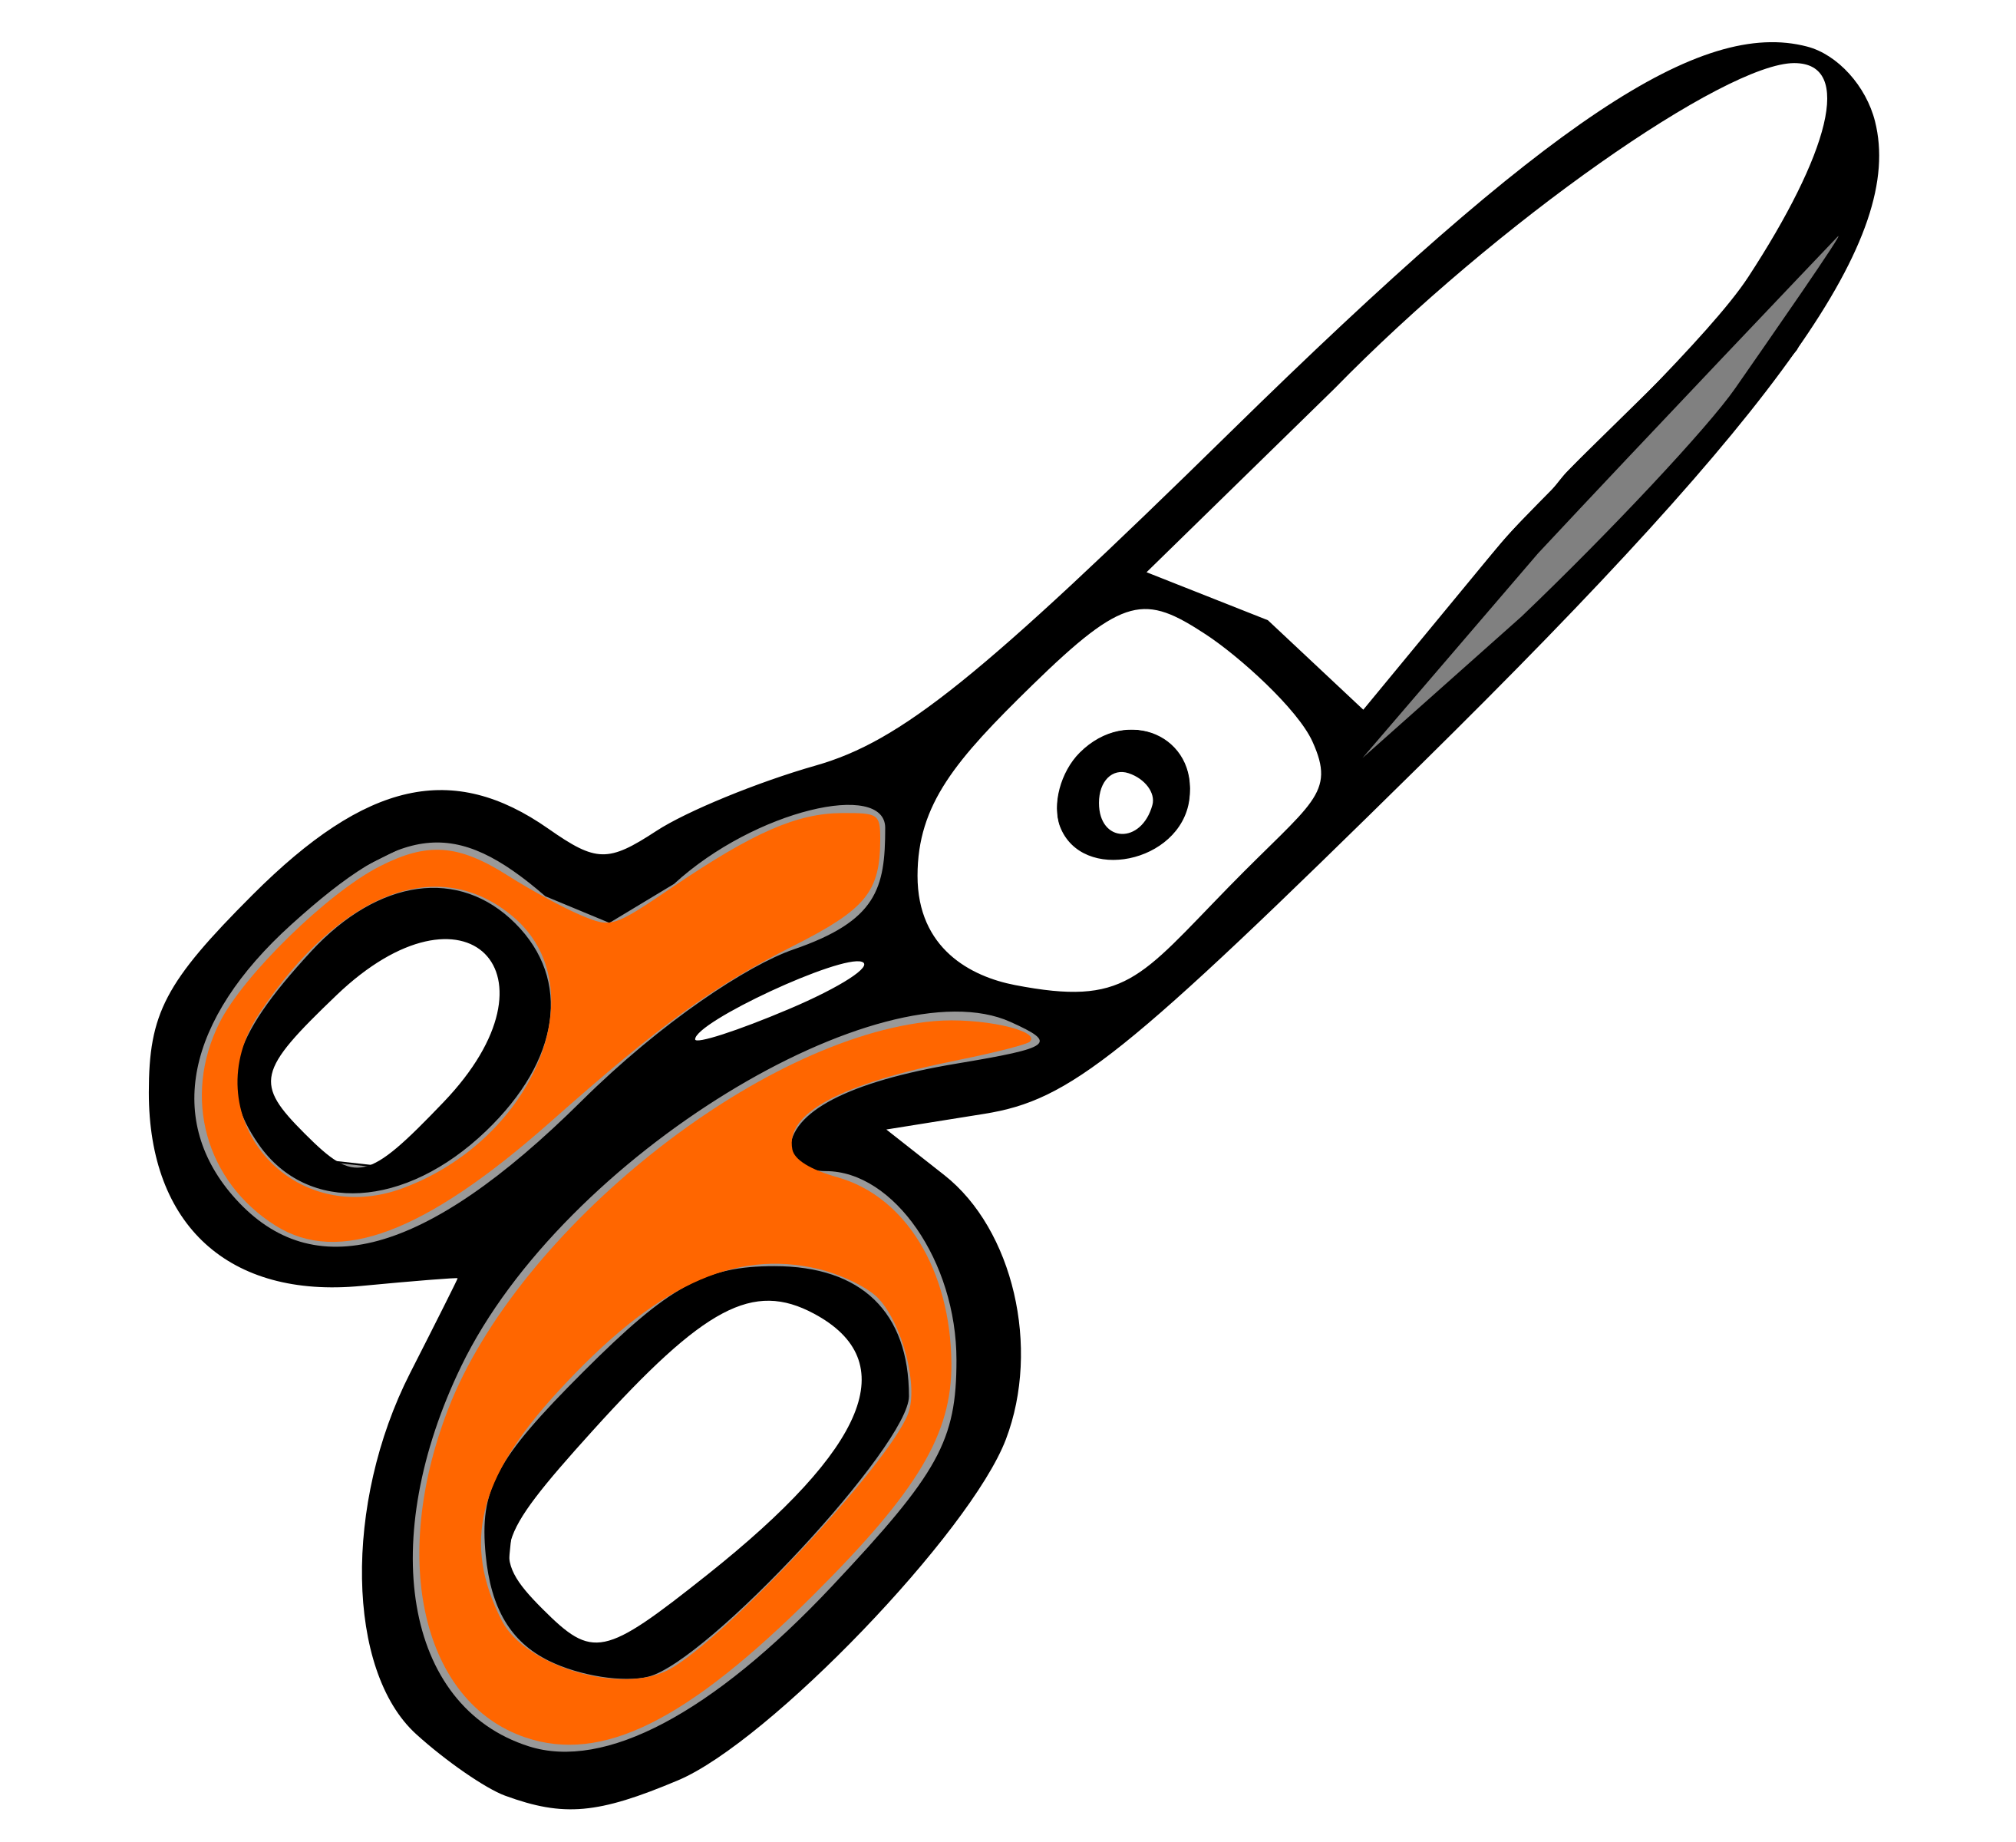 Clipart scissors classroom object. Archilla evelyn objects in